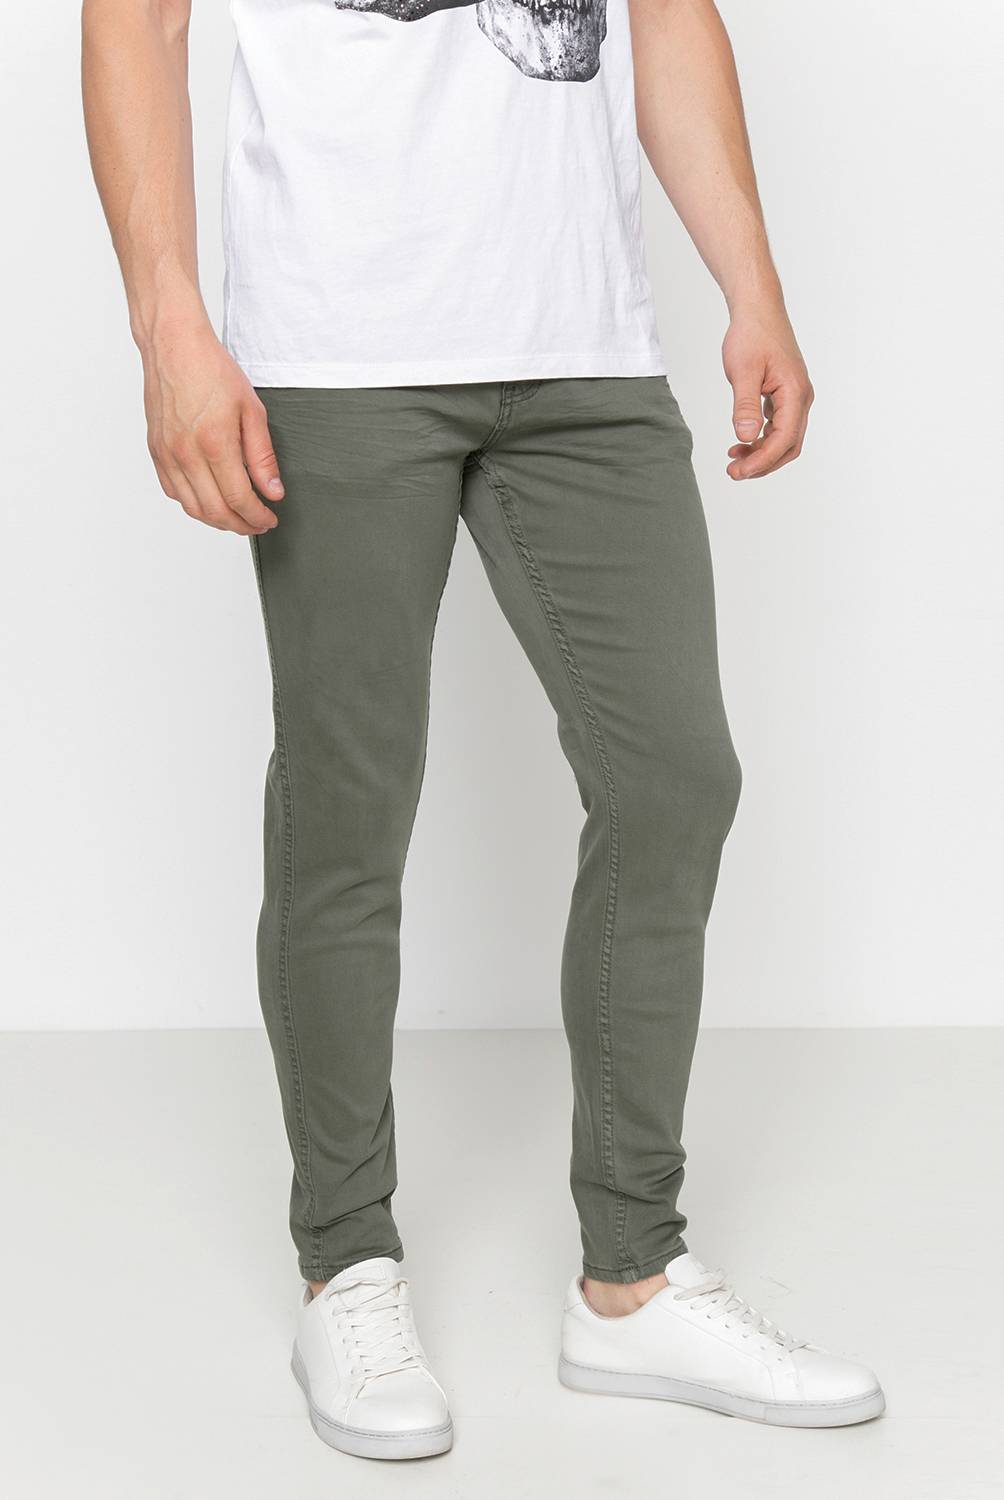 MOSSIMO - Jeans Skinny Fit Hombre